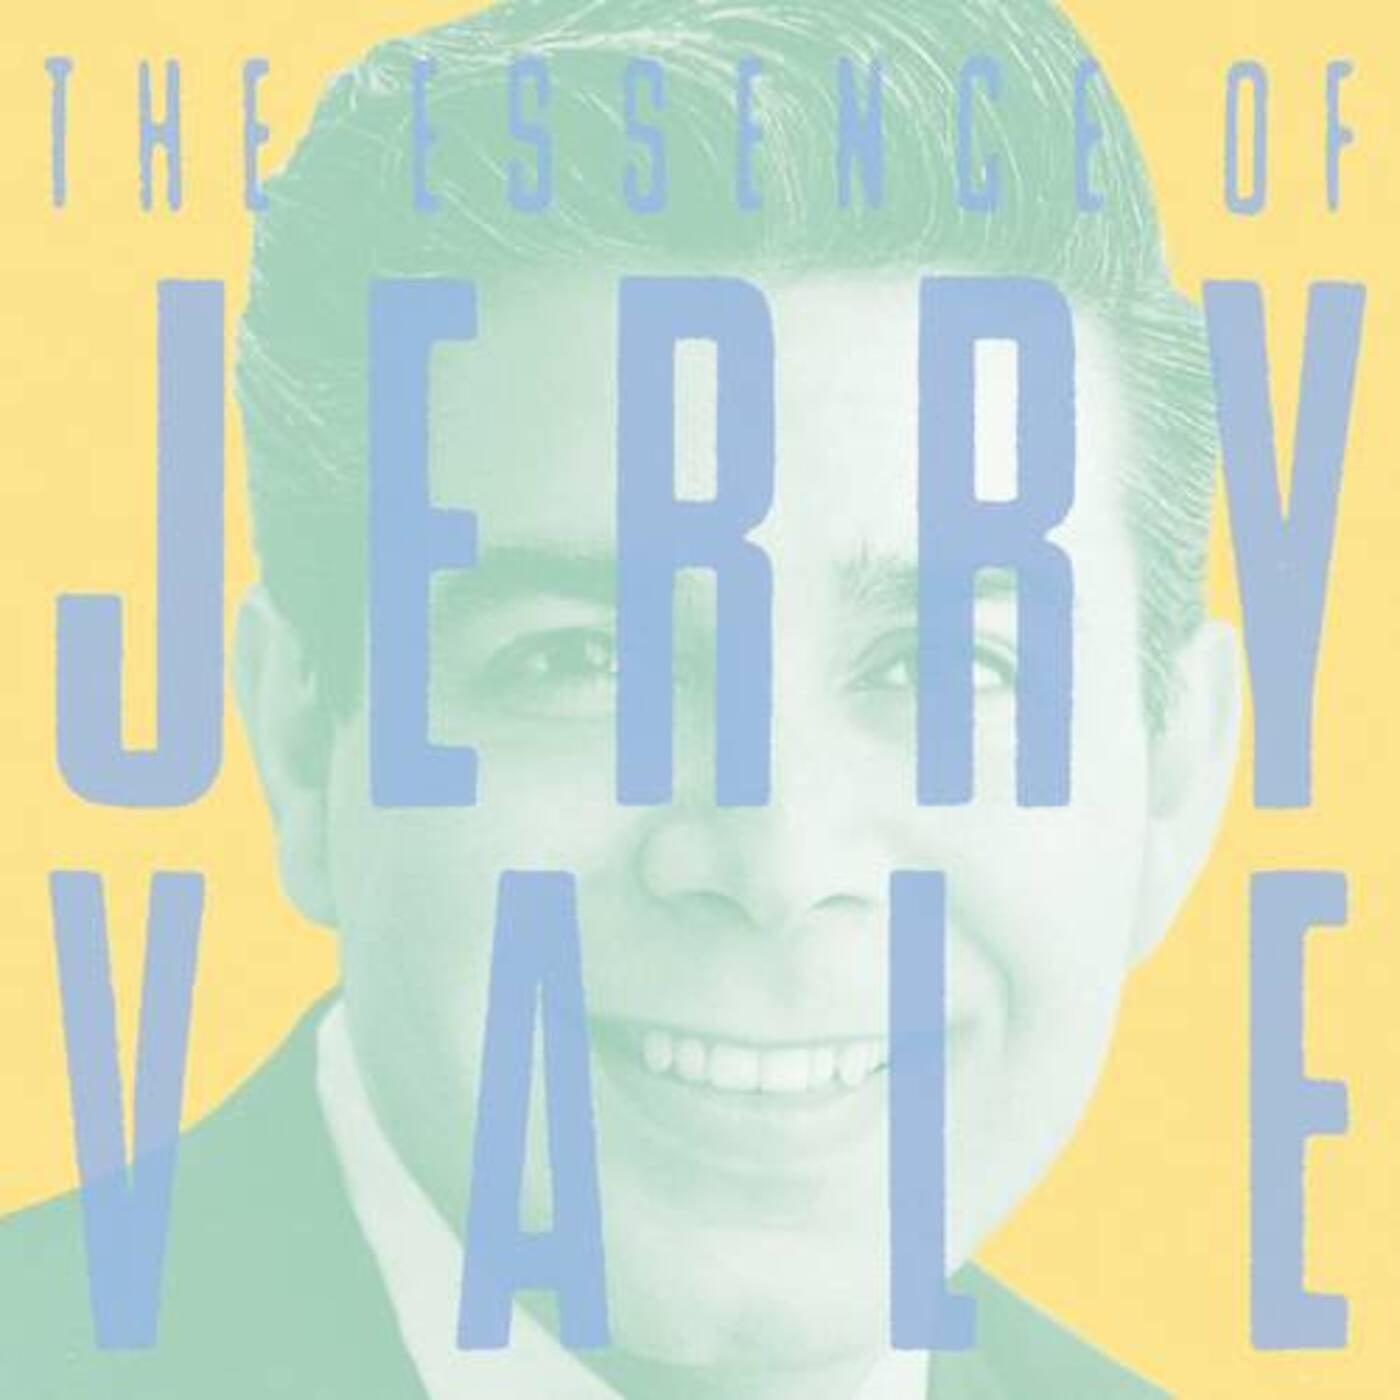 Alone Again (Naturally) by Jerry Vale on Beatsource